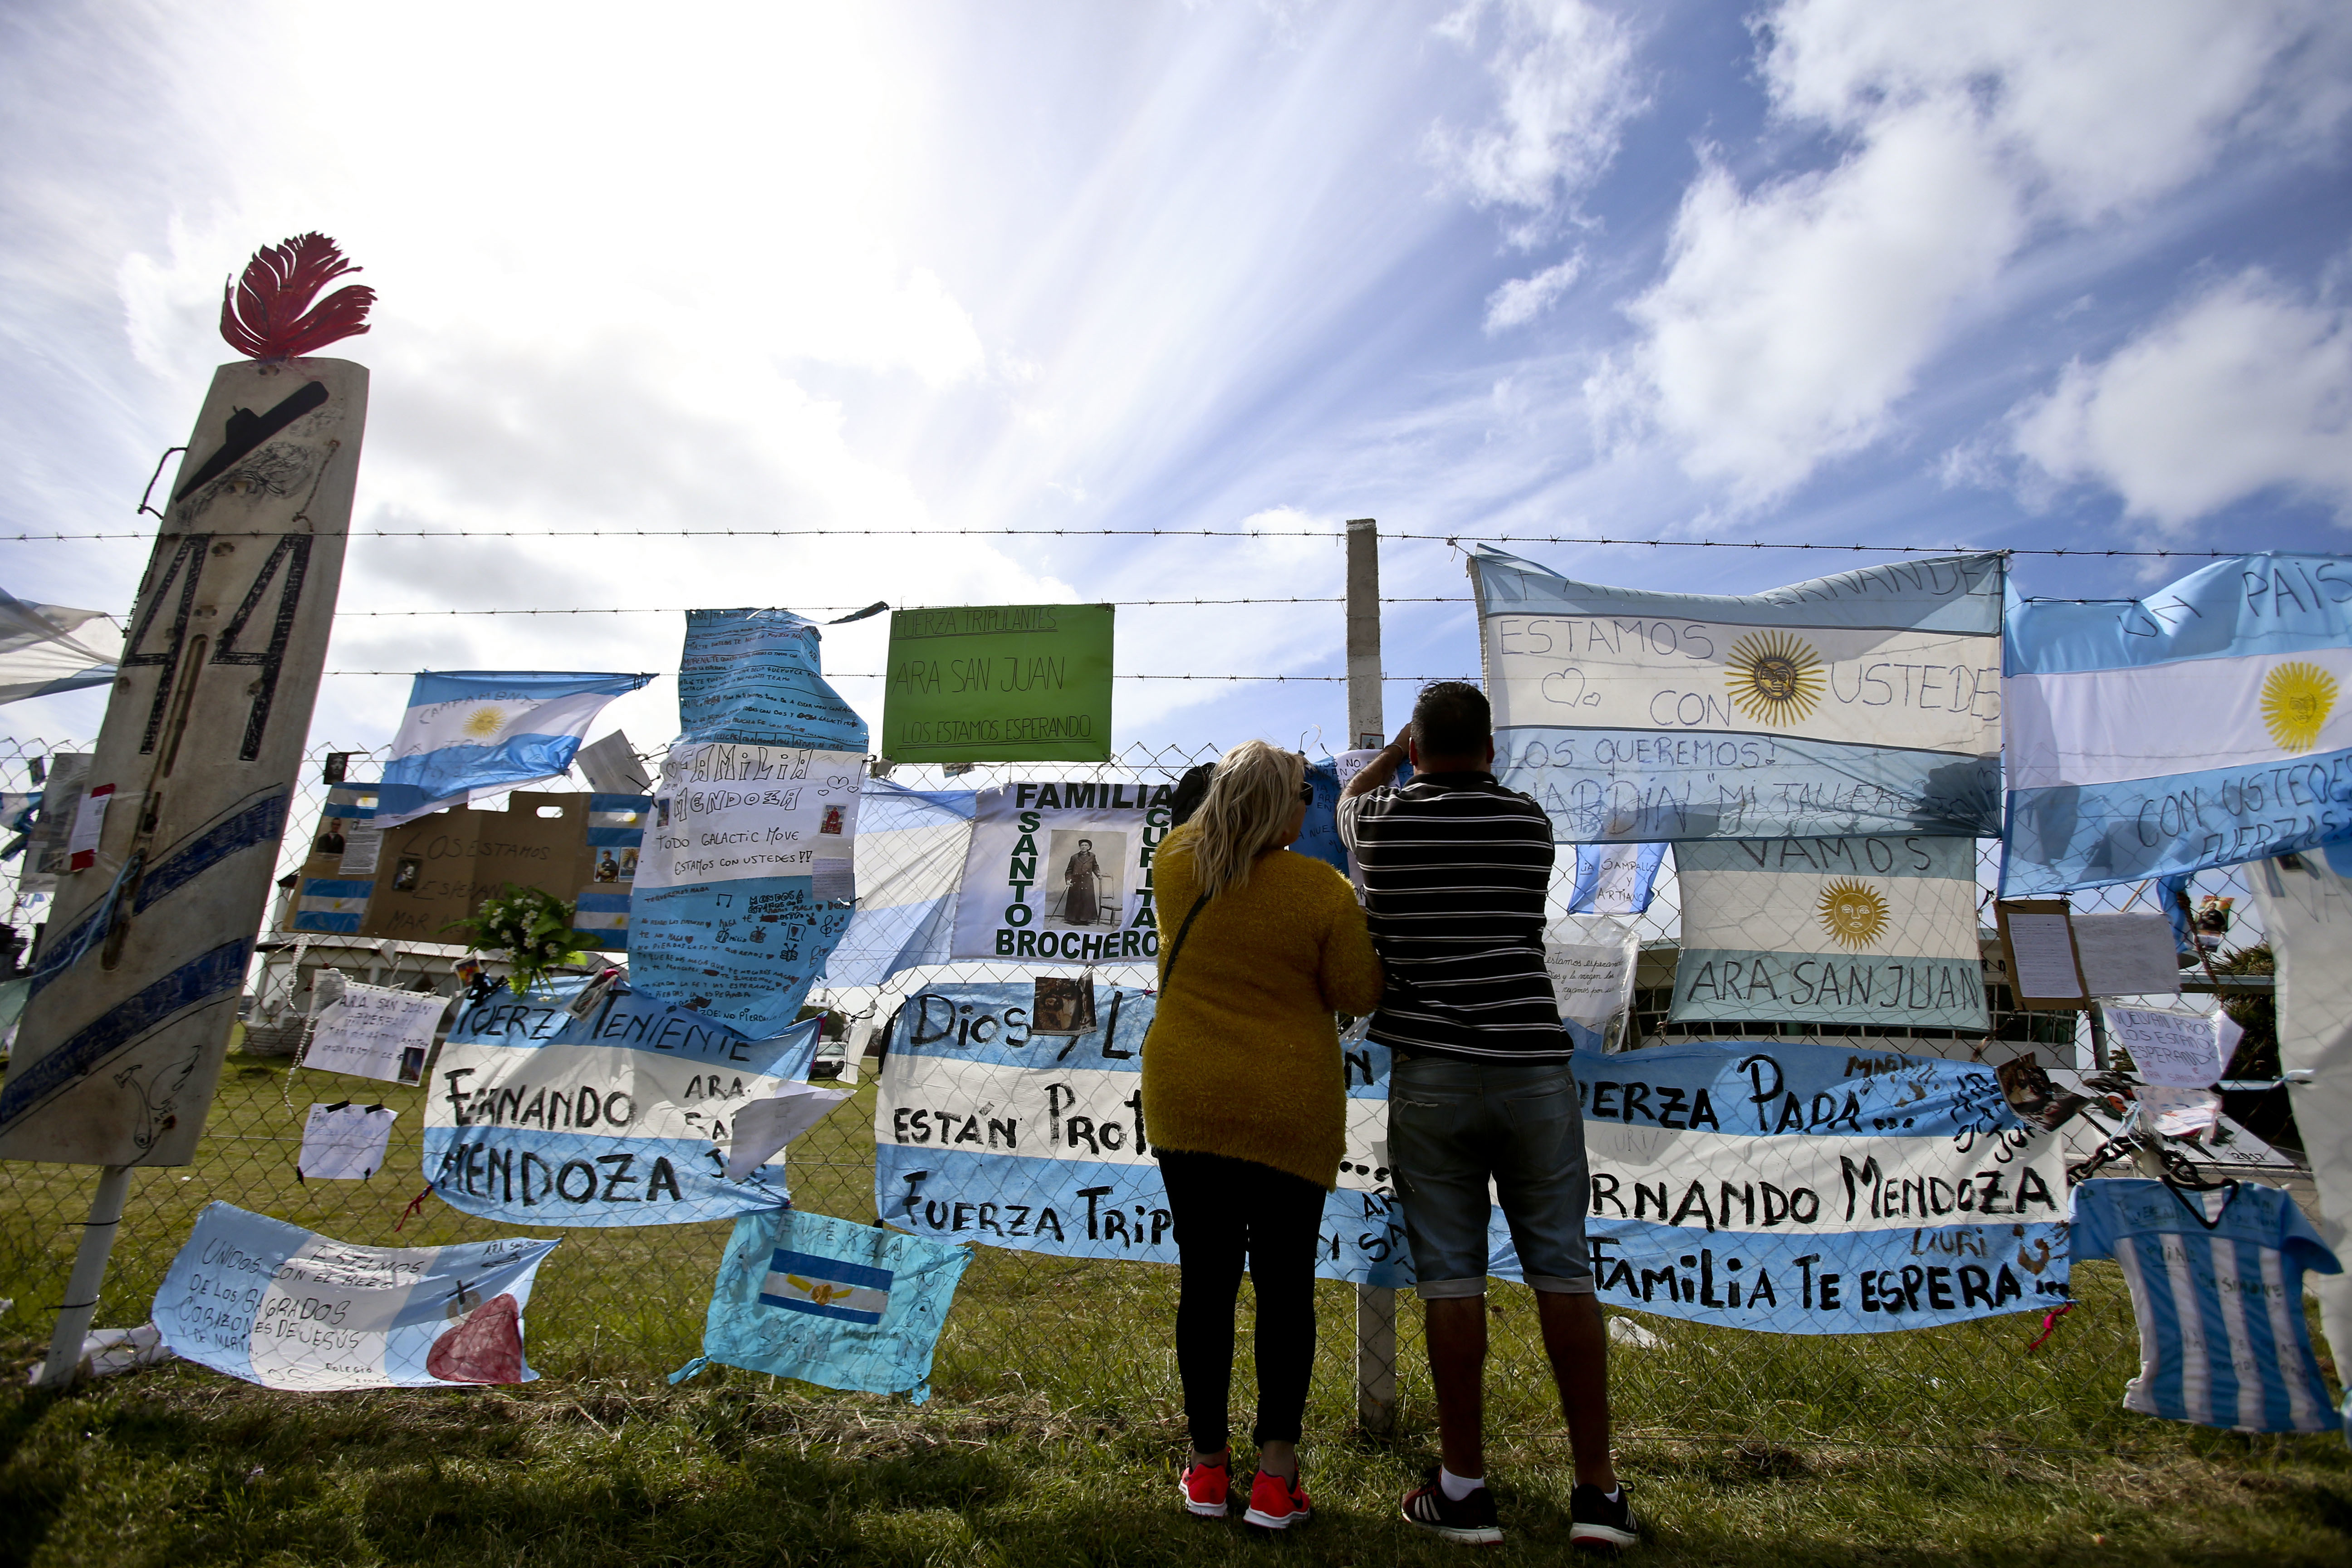 Friends and family of missing submarine crew members place a flag on the fence of the naval base in Mar de Plata, Argentina, Friday, Nov. 24, 2017. The Argentine navy says an explosion occurred near the time and place where the ARA San Juan submarine went missing on Nov. 15, leading some family members of the crew to give up hope of a rescue. (AP Photo/Esteban Felix)